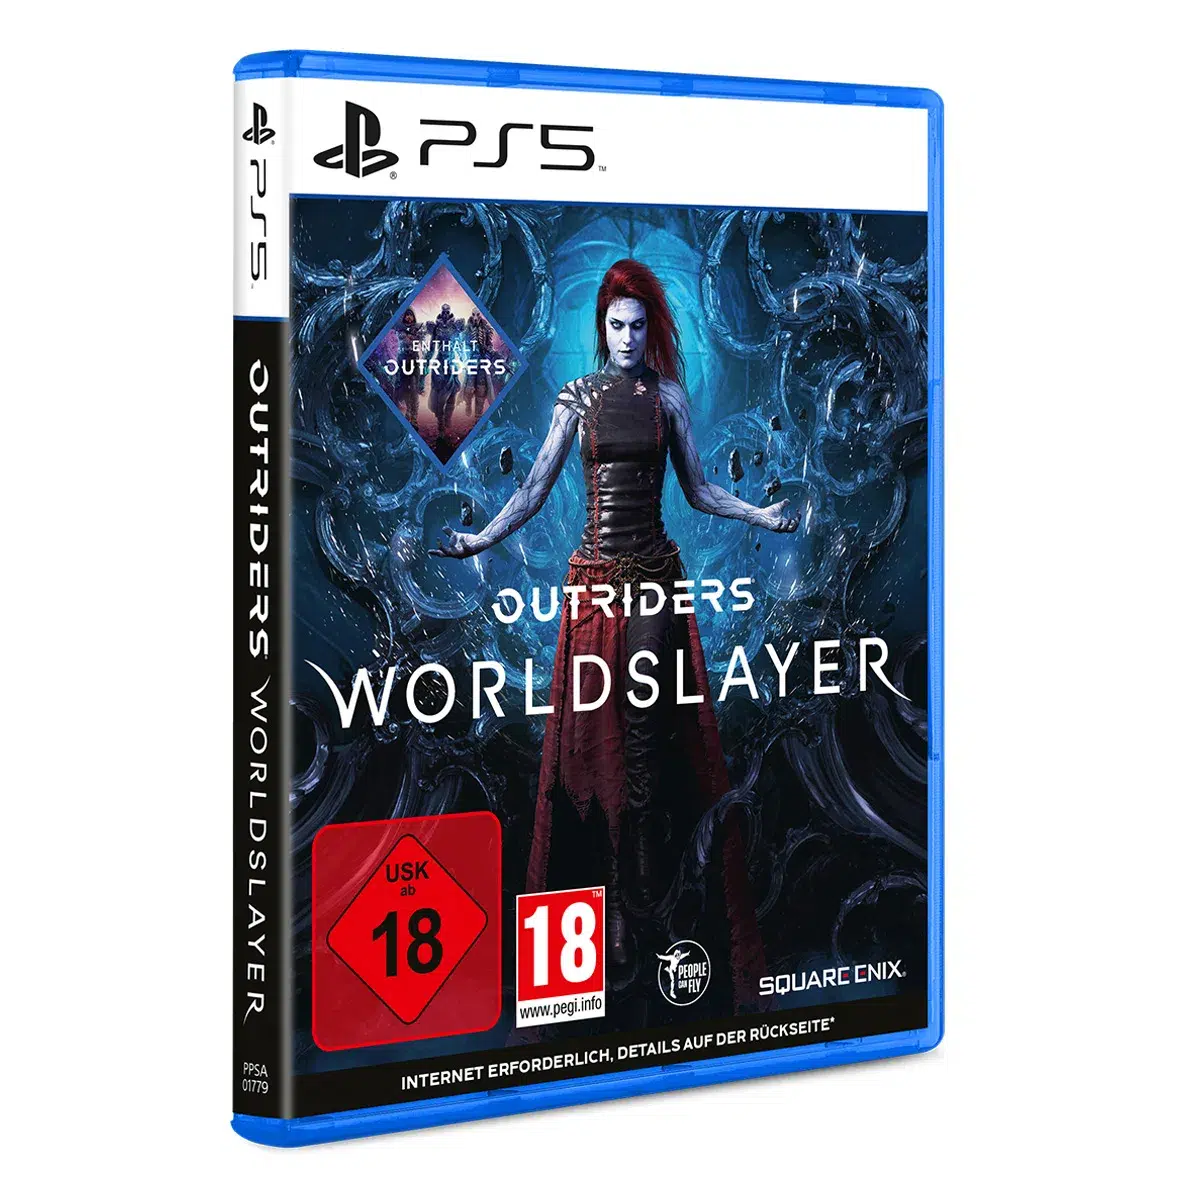 Outriders Worldslayer Edition (PS5) Image 2